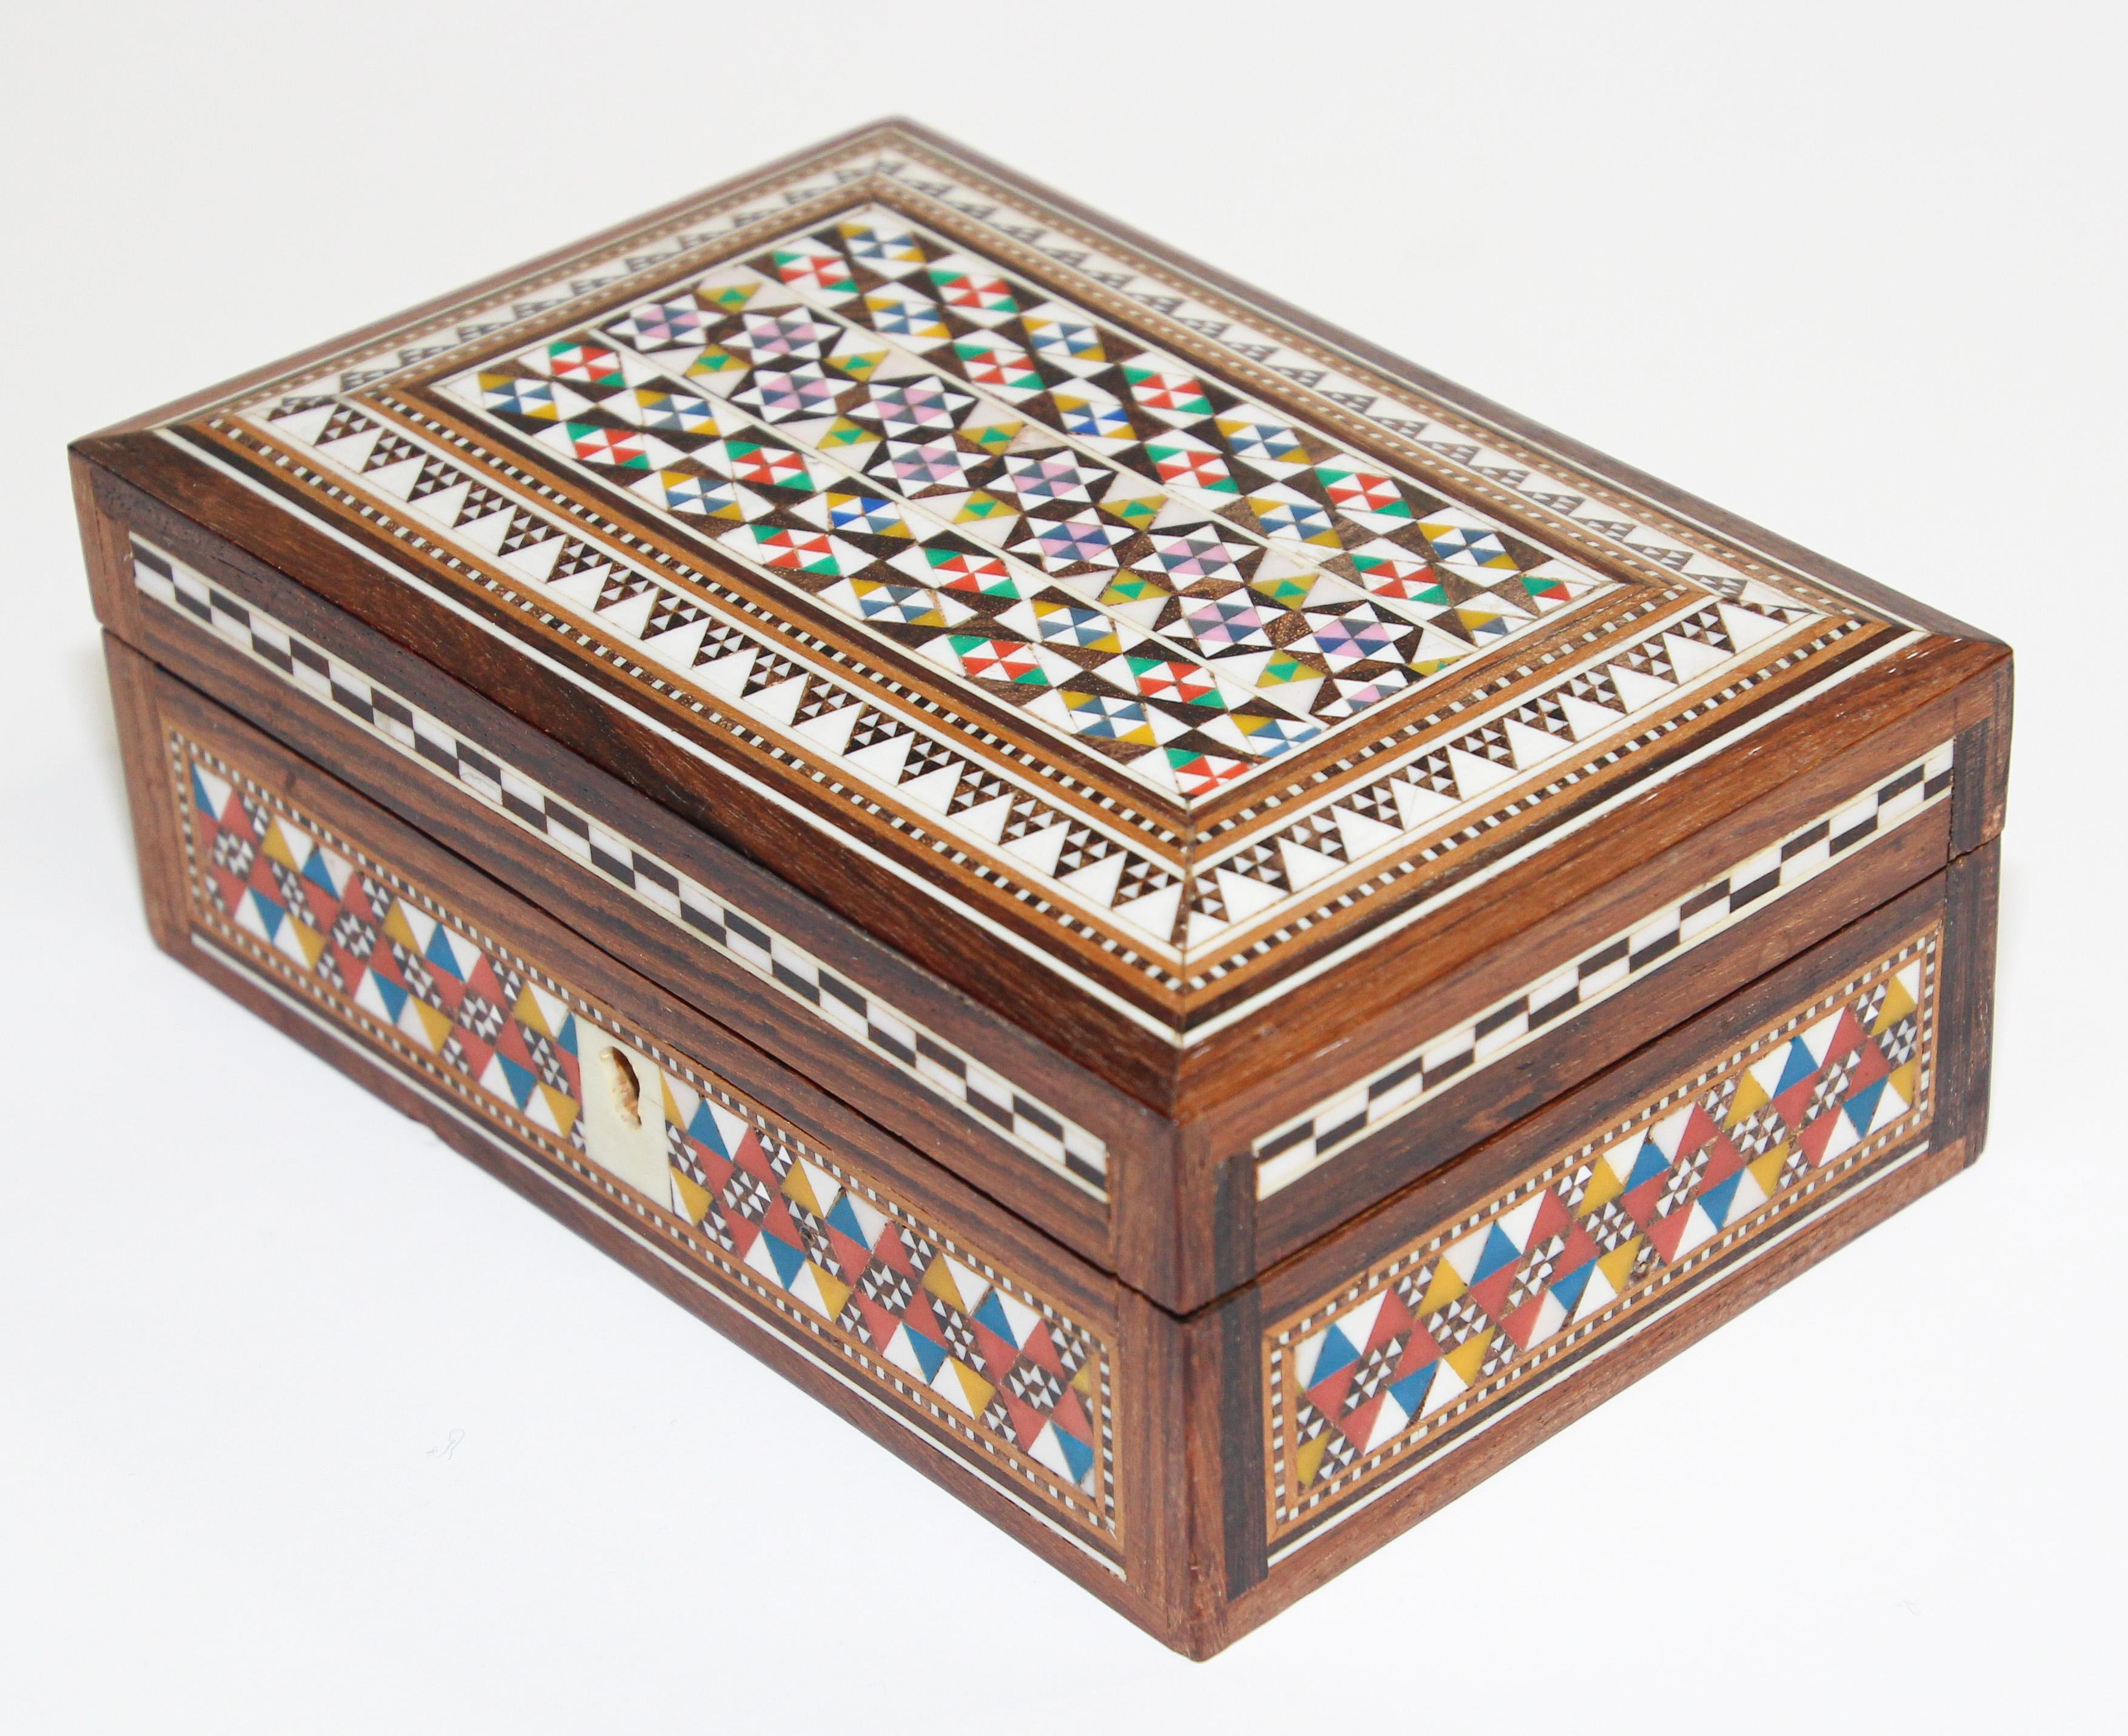 Exquisite handcrafted Middle Eastern Lebanese, Egyptian mosaic marquetry wood box inlaid.
Small vintage walnut Syrian style box intricately decorated with Moorish motif designs which have been painstakingly inlaid with mosaic shell and